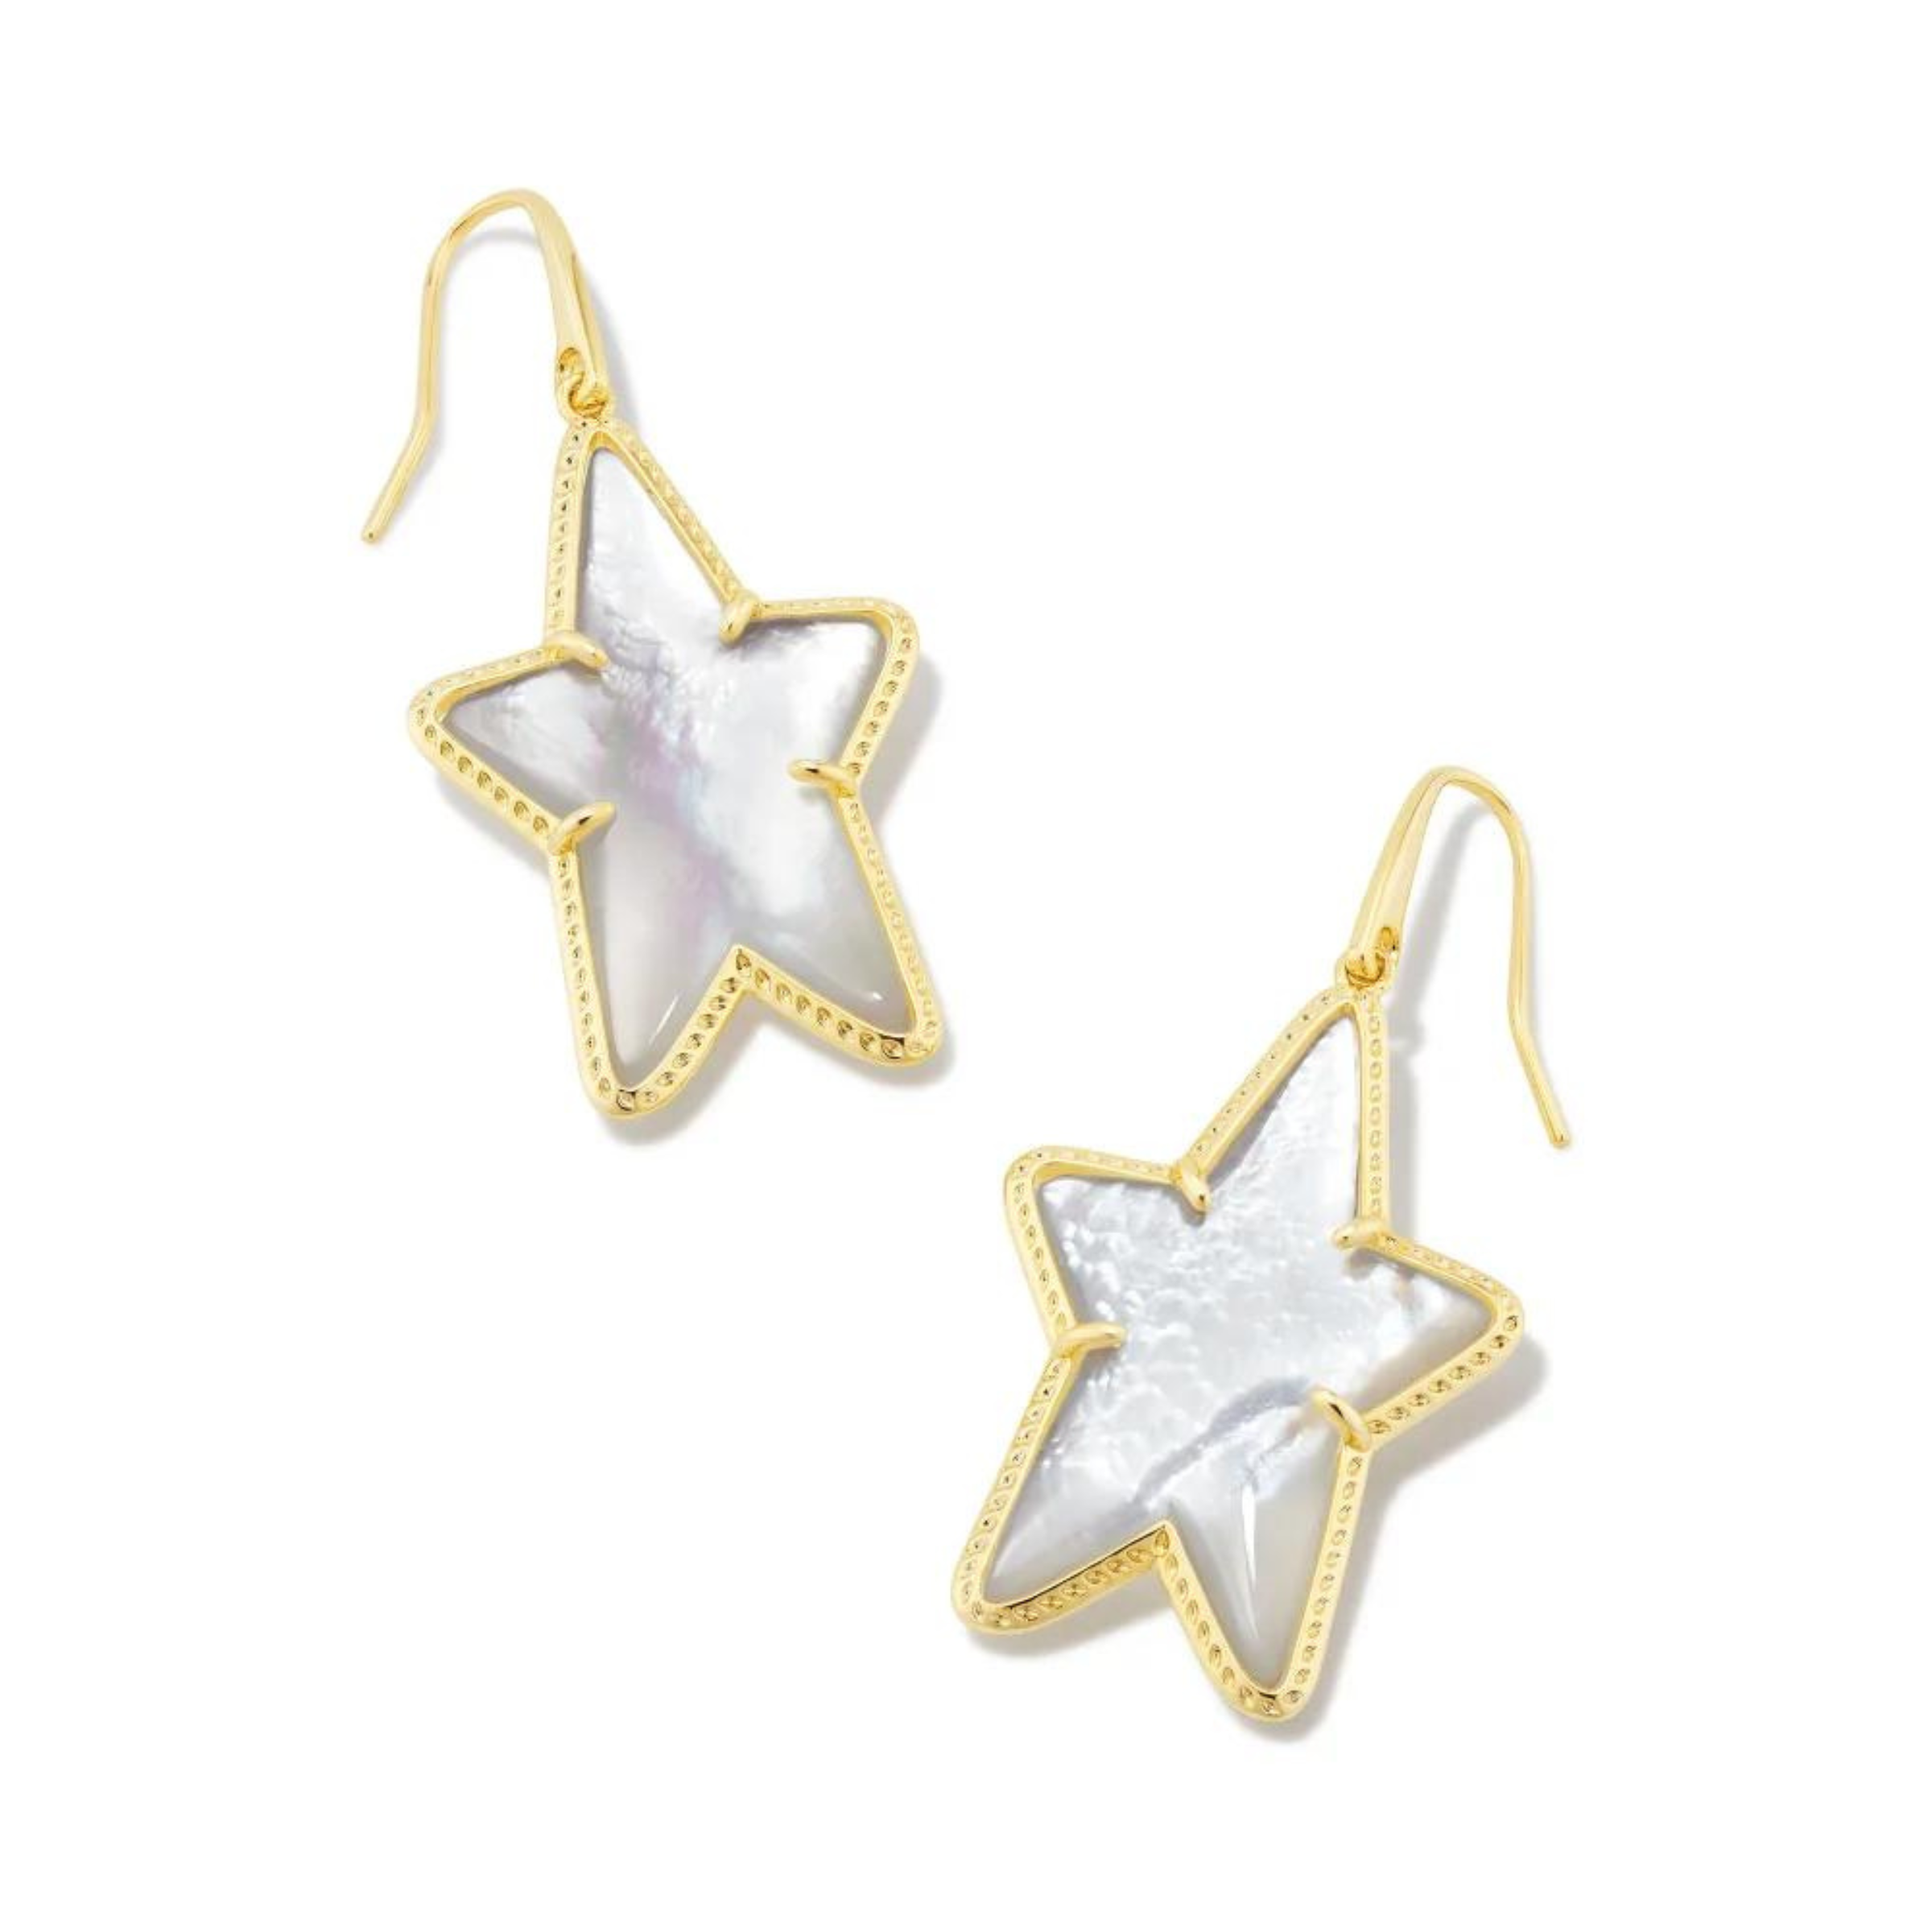 Pictured on a white background are gold fish hook earrings with a gold star dangle that includes an ivory colored star shaped stone. 